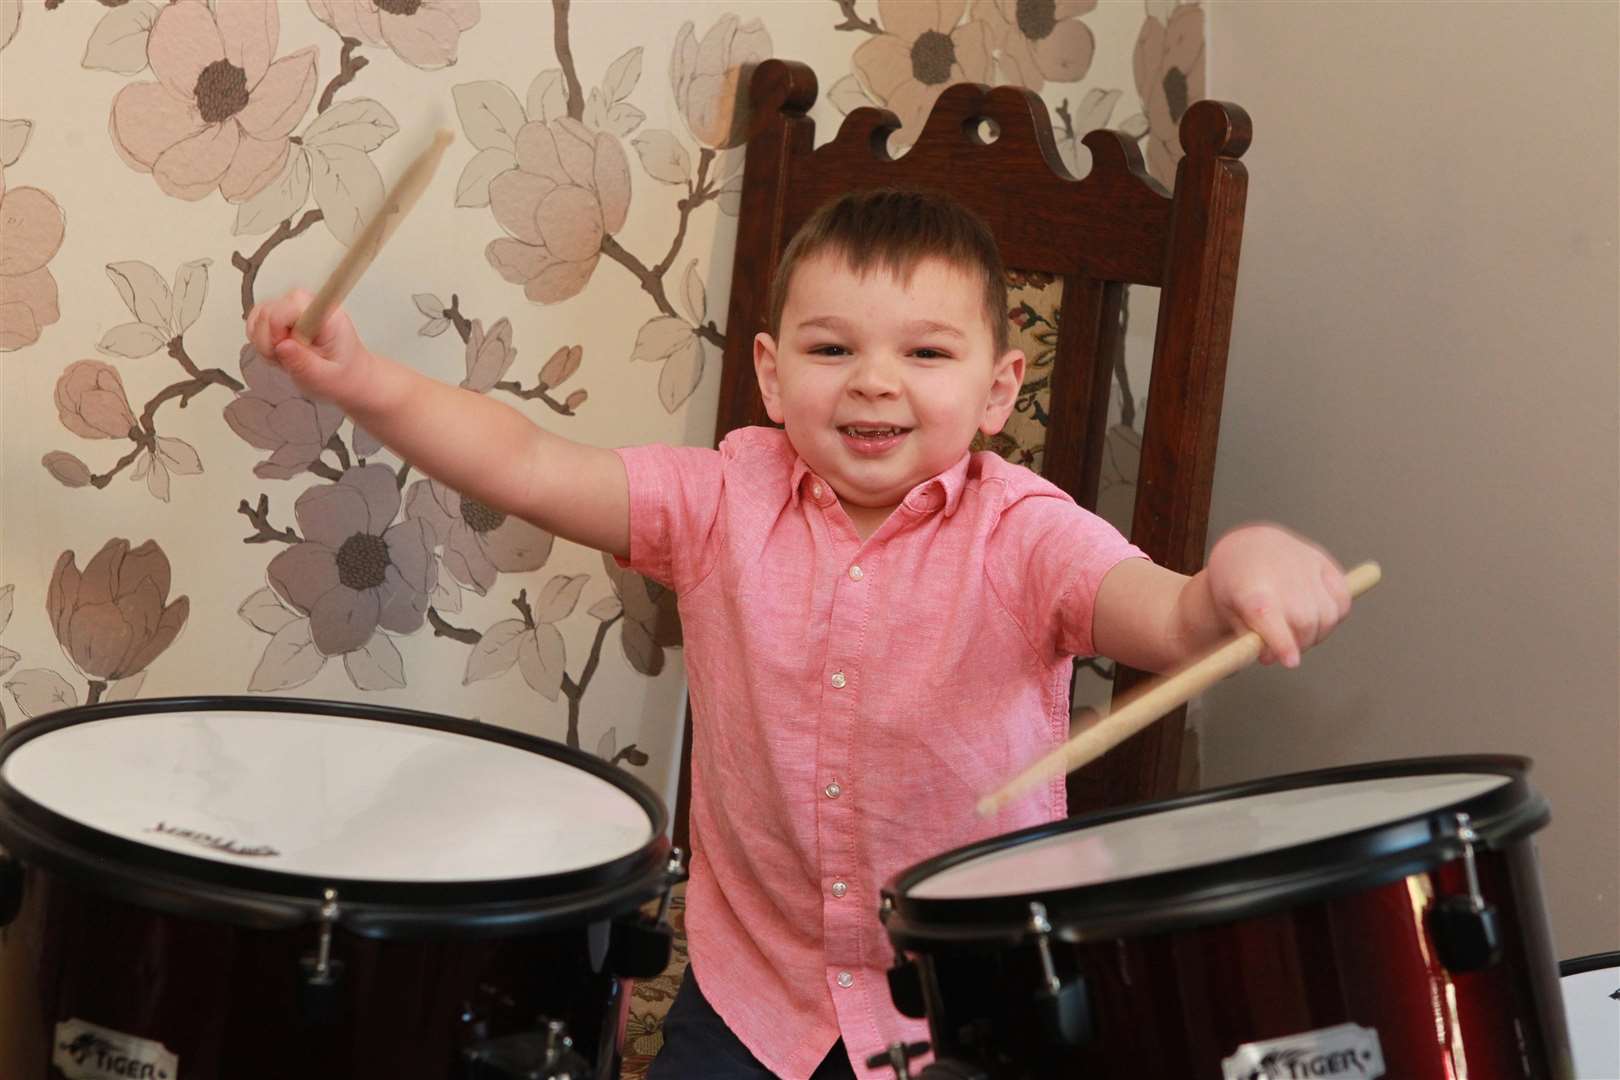 Tony Hudgell, four, playing drums. Picture: John Westhrop